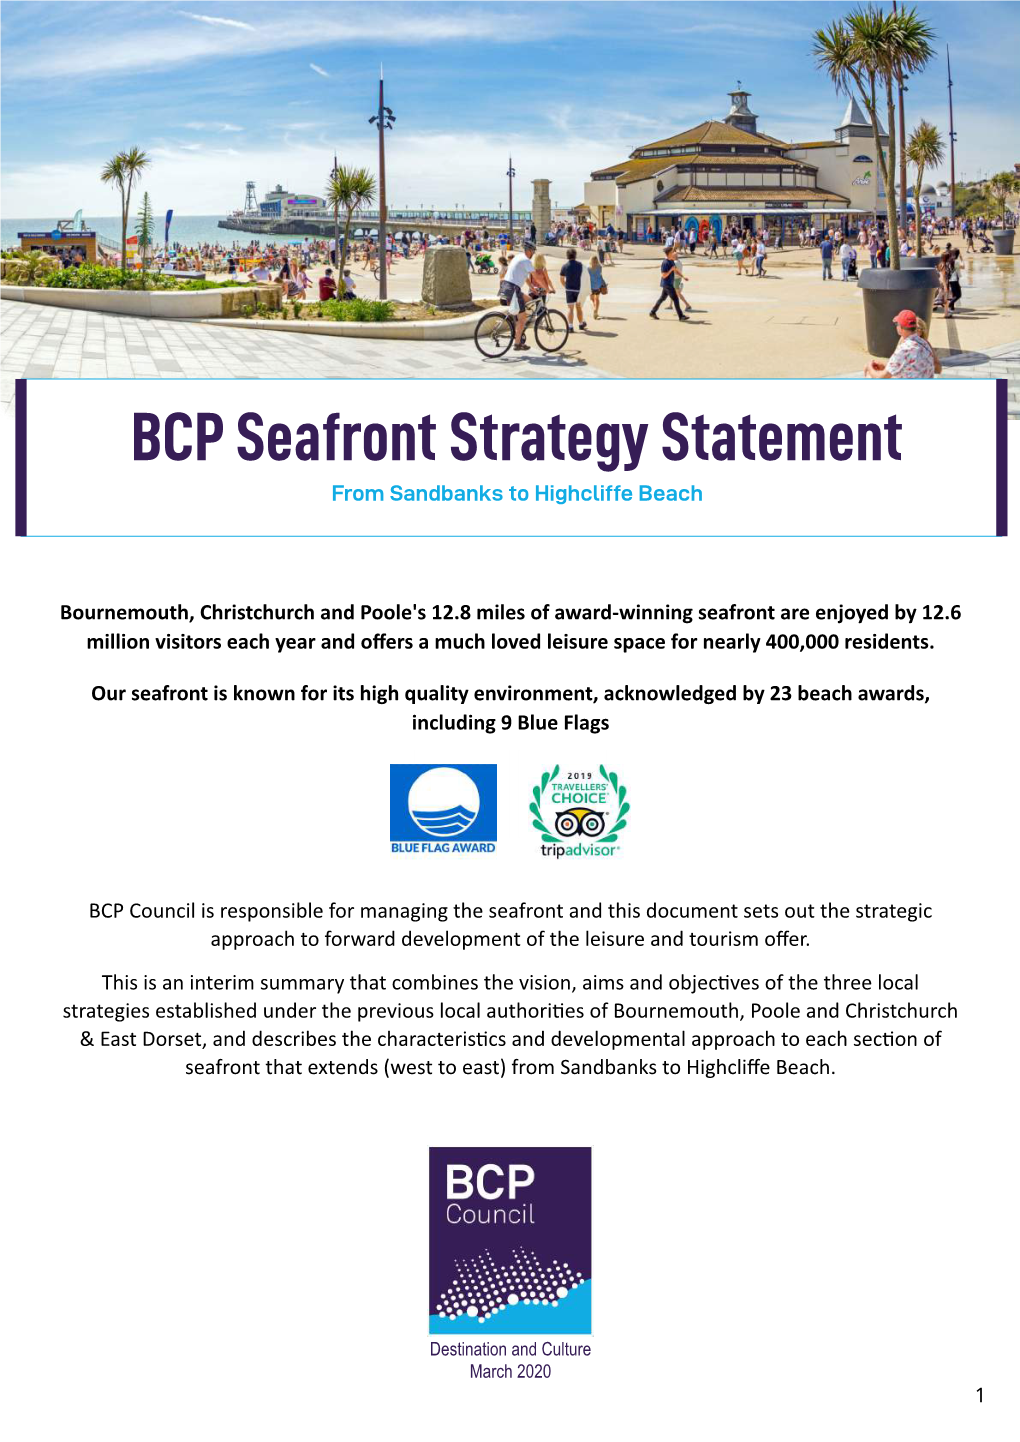 BCP Seafront Strategy Statement from Sandbanks to Highcliffe Beach